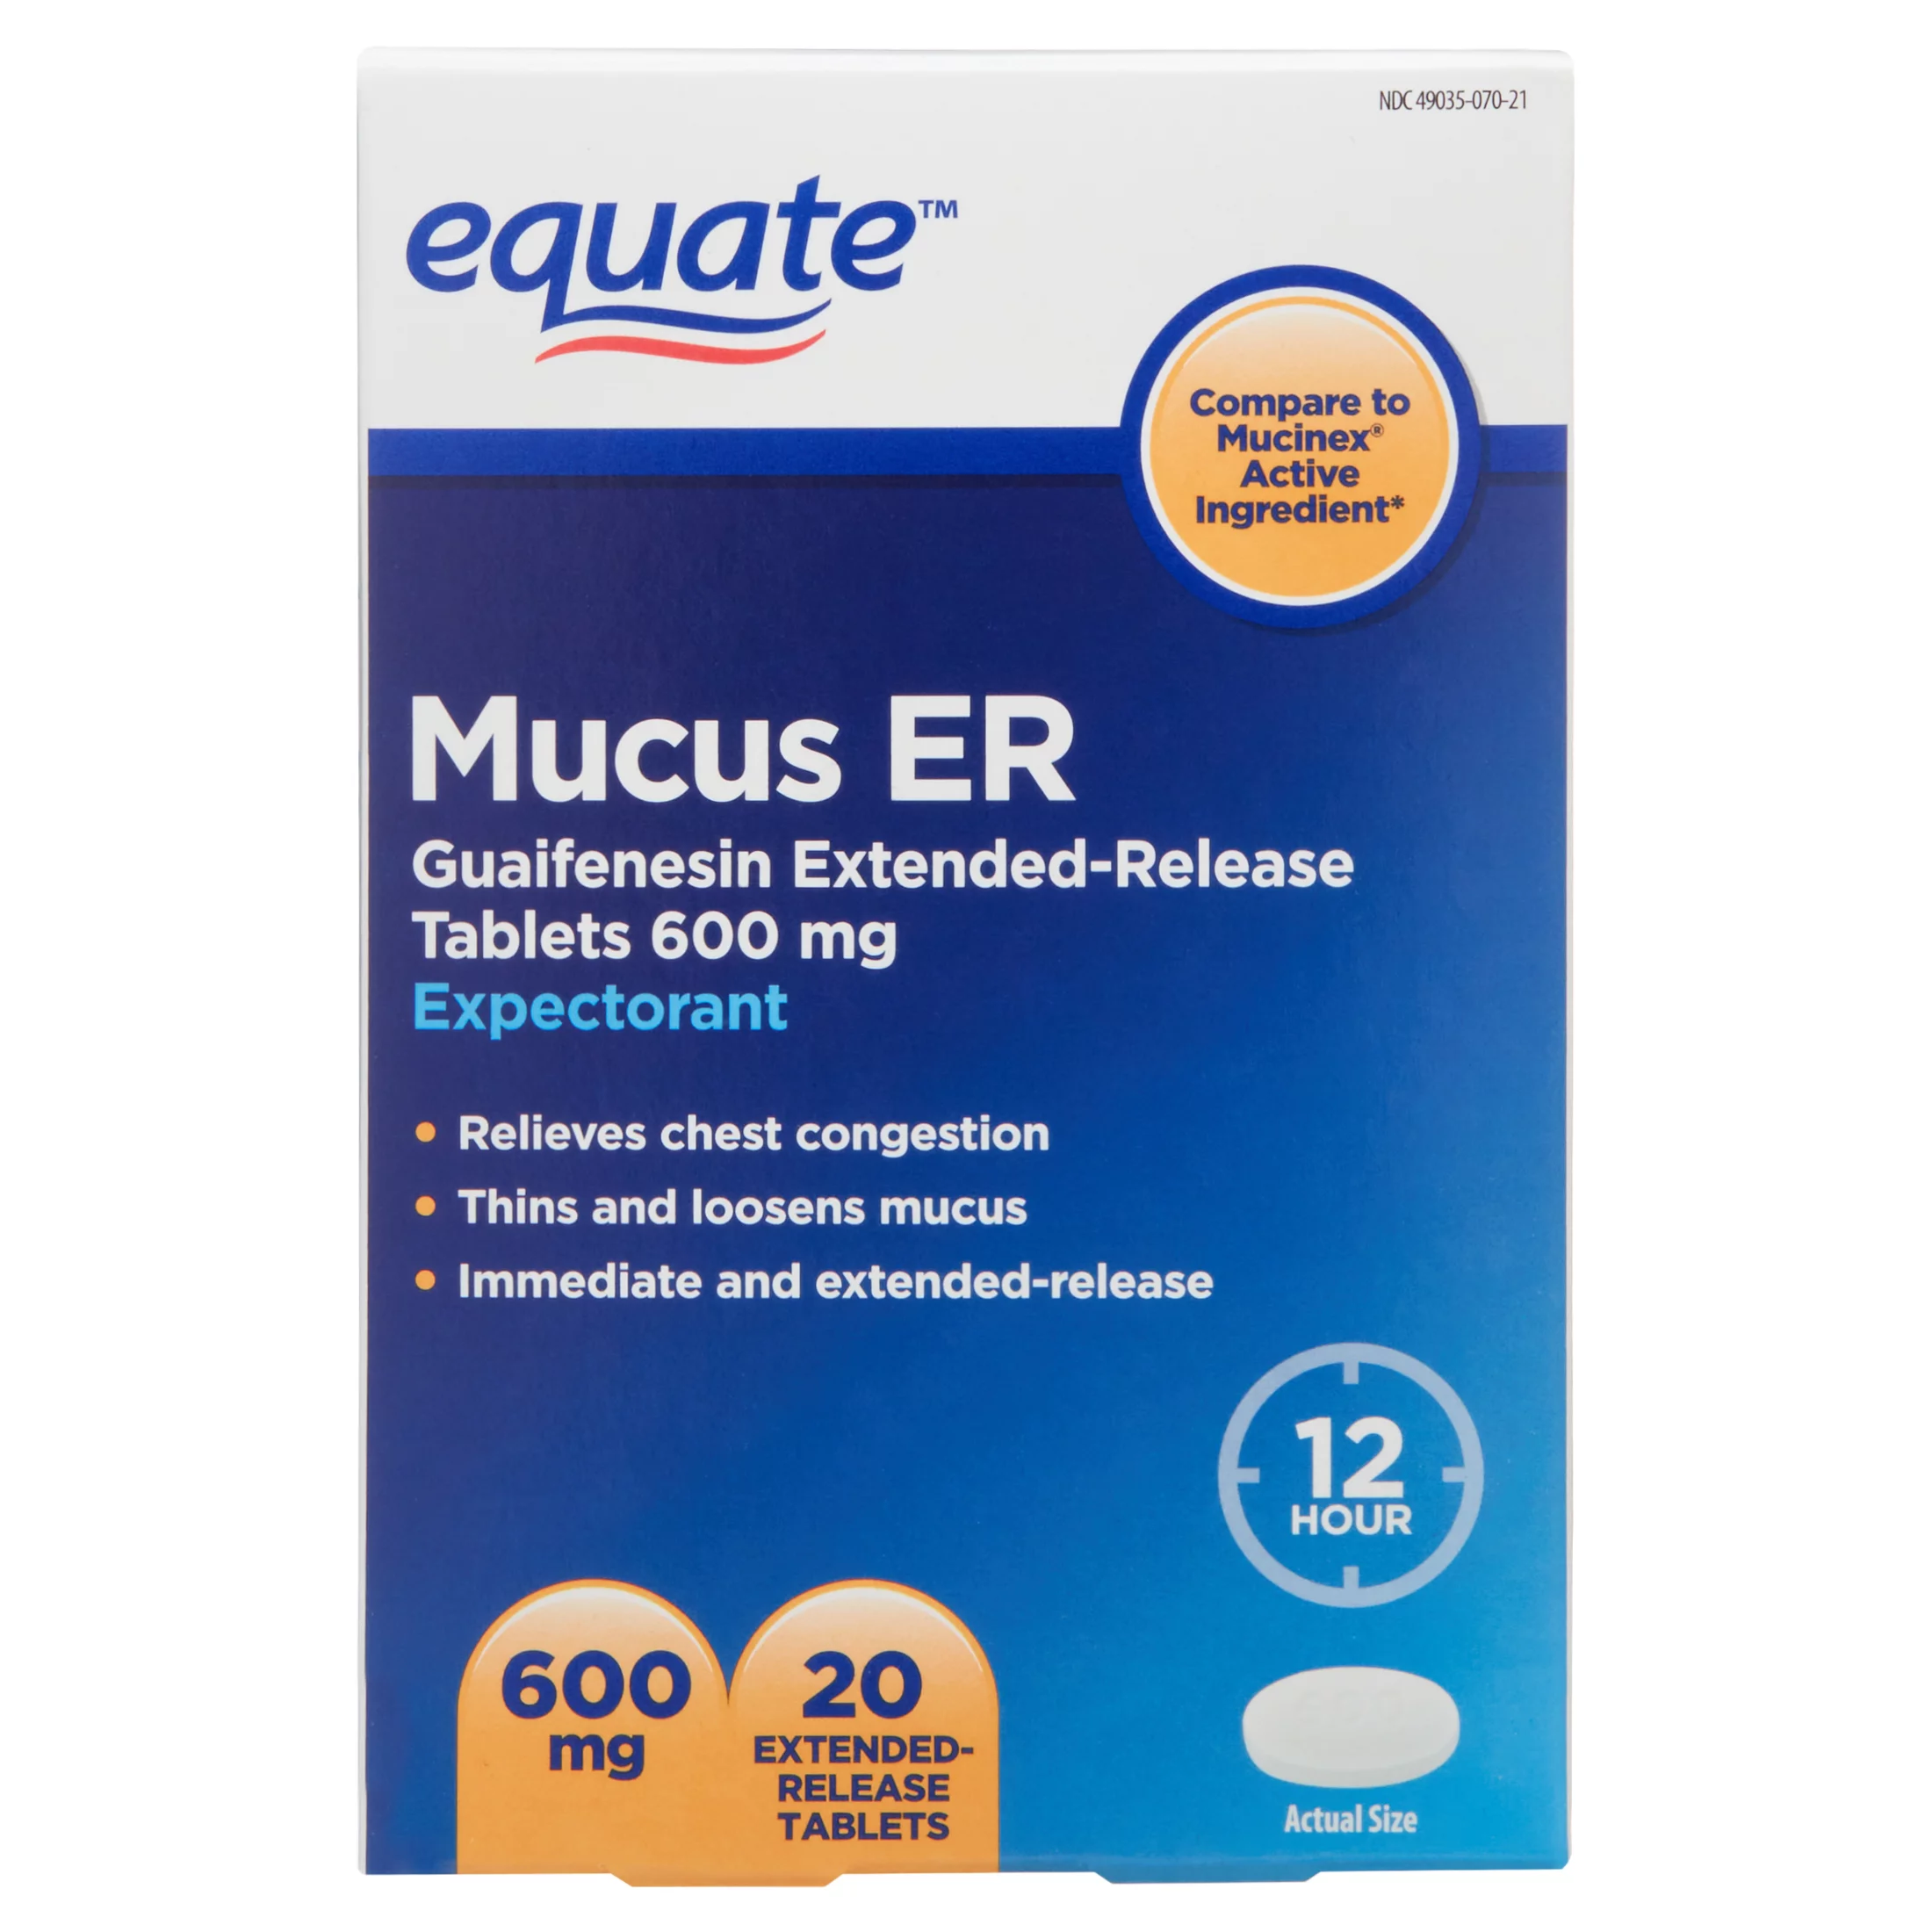 Equate Mucus ER Extended-Release Tablets, 600 mg, 20 Count